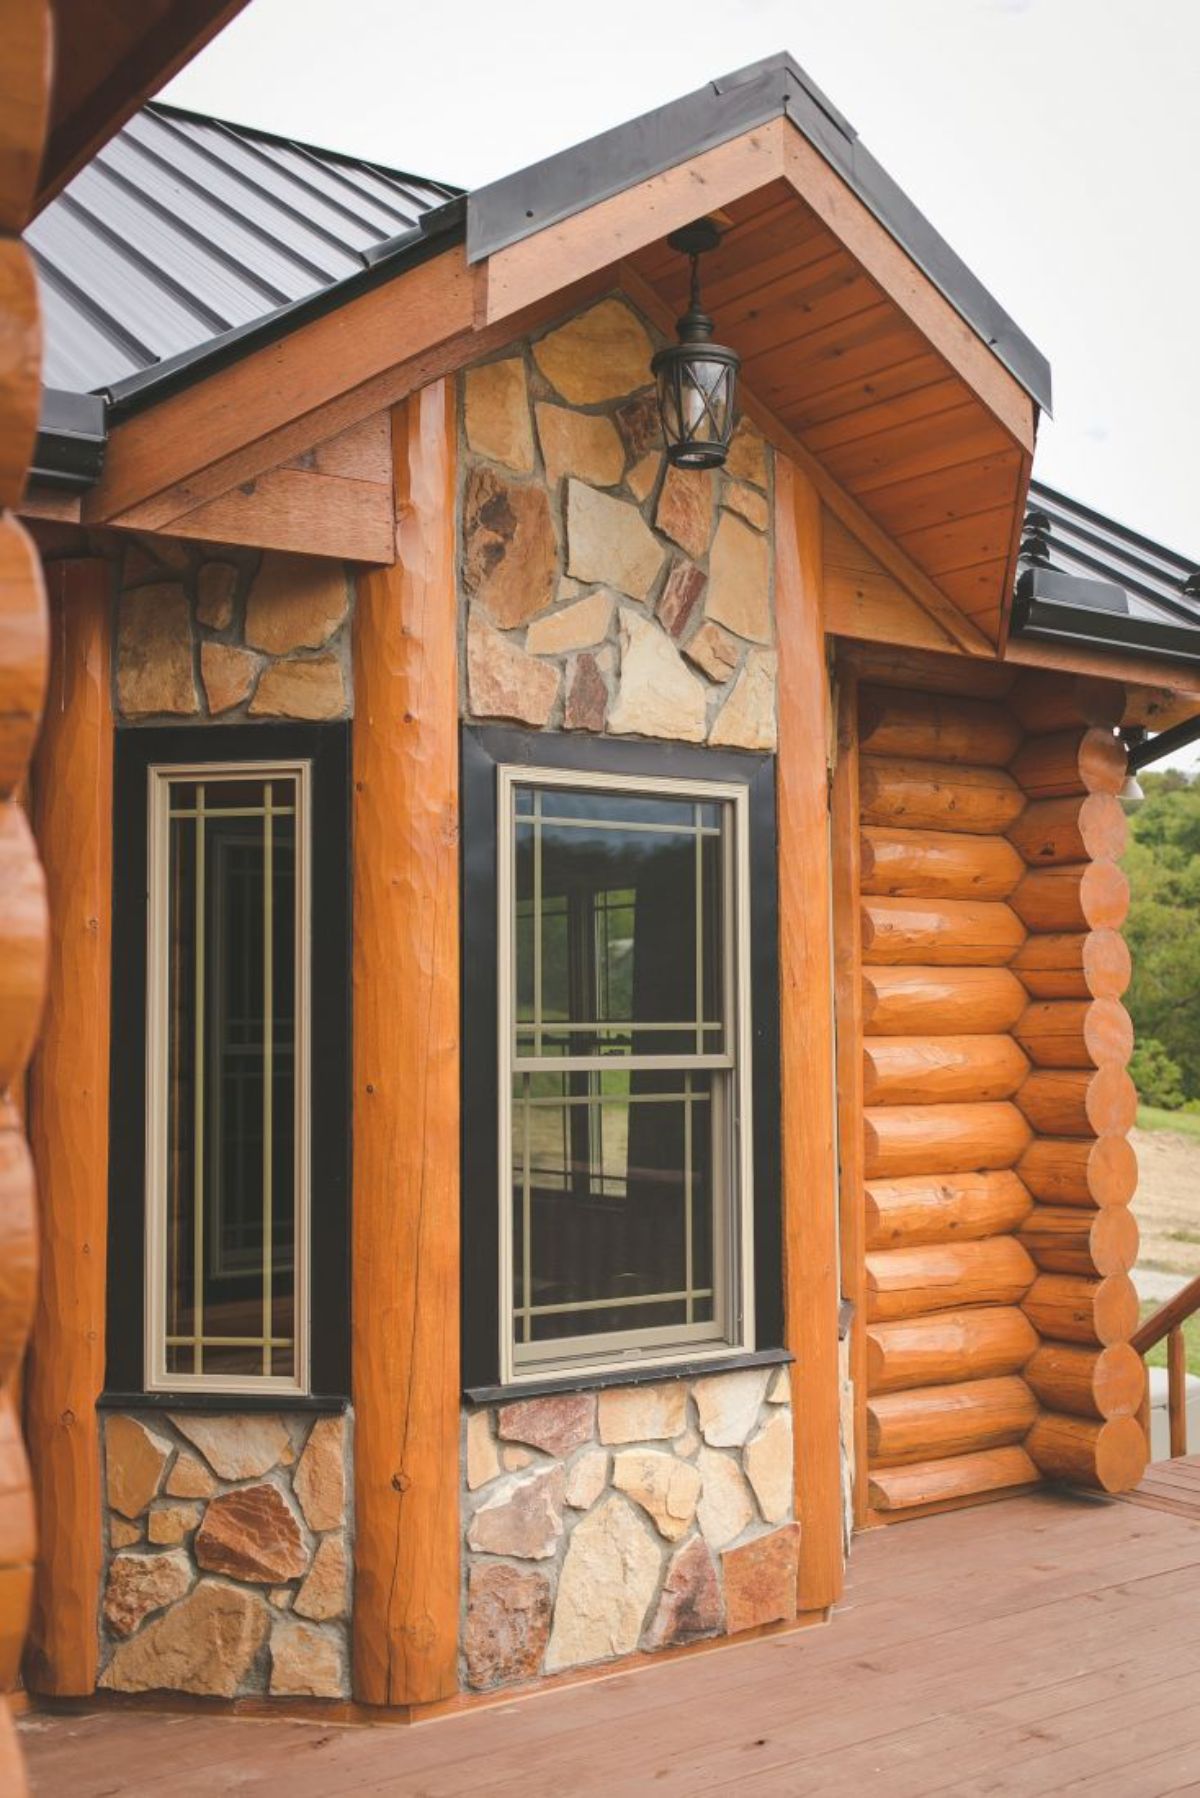 stone and log outcropping on log cabin with black trim around windows